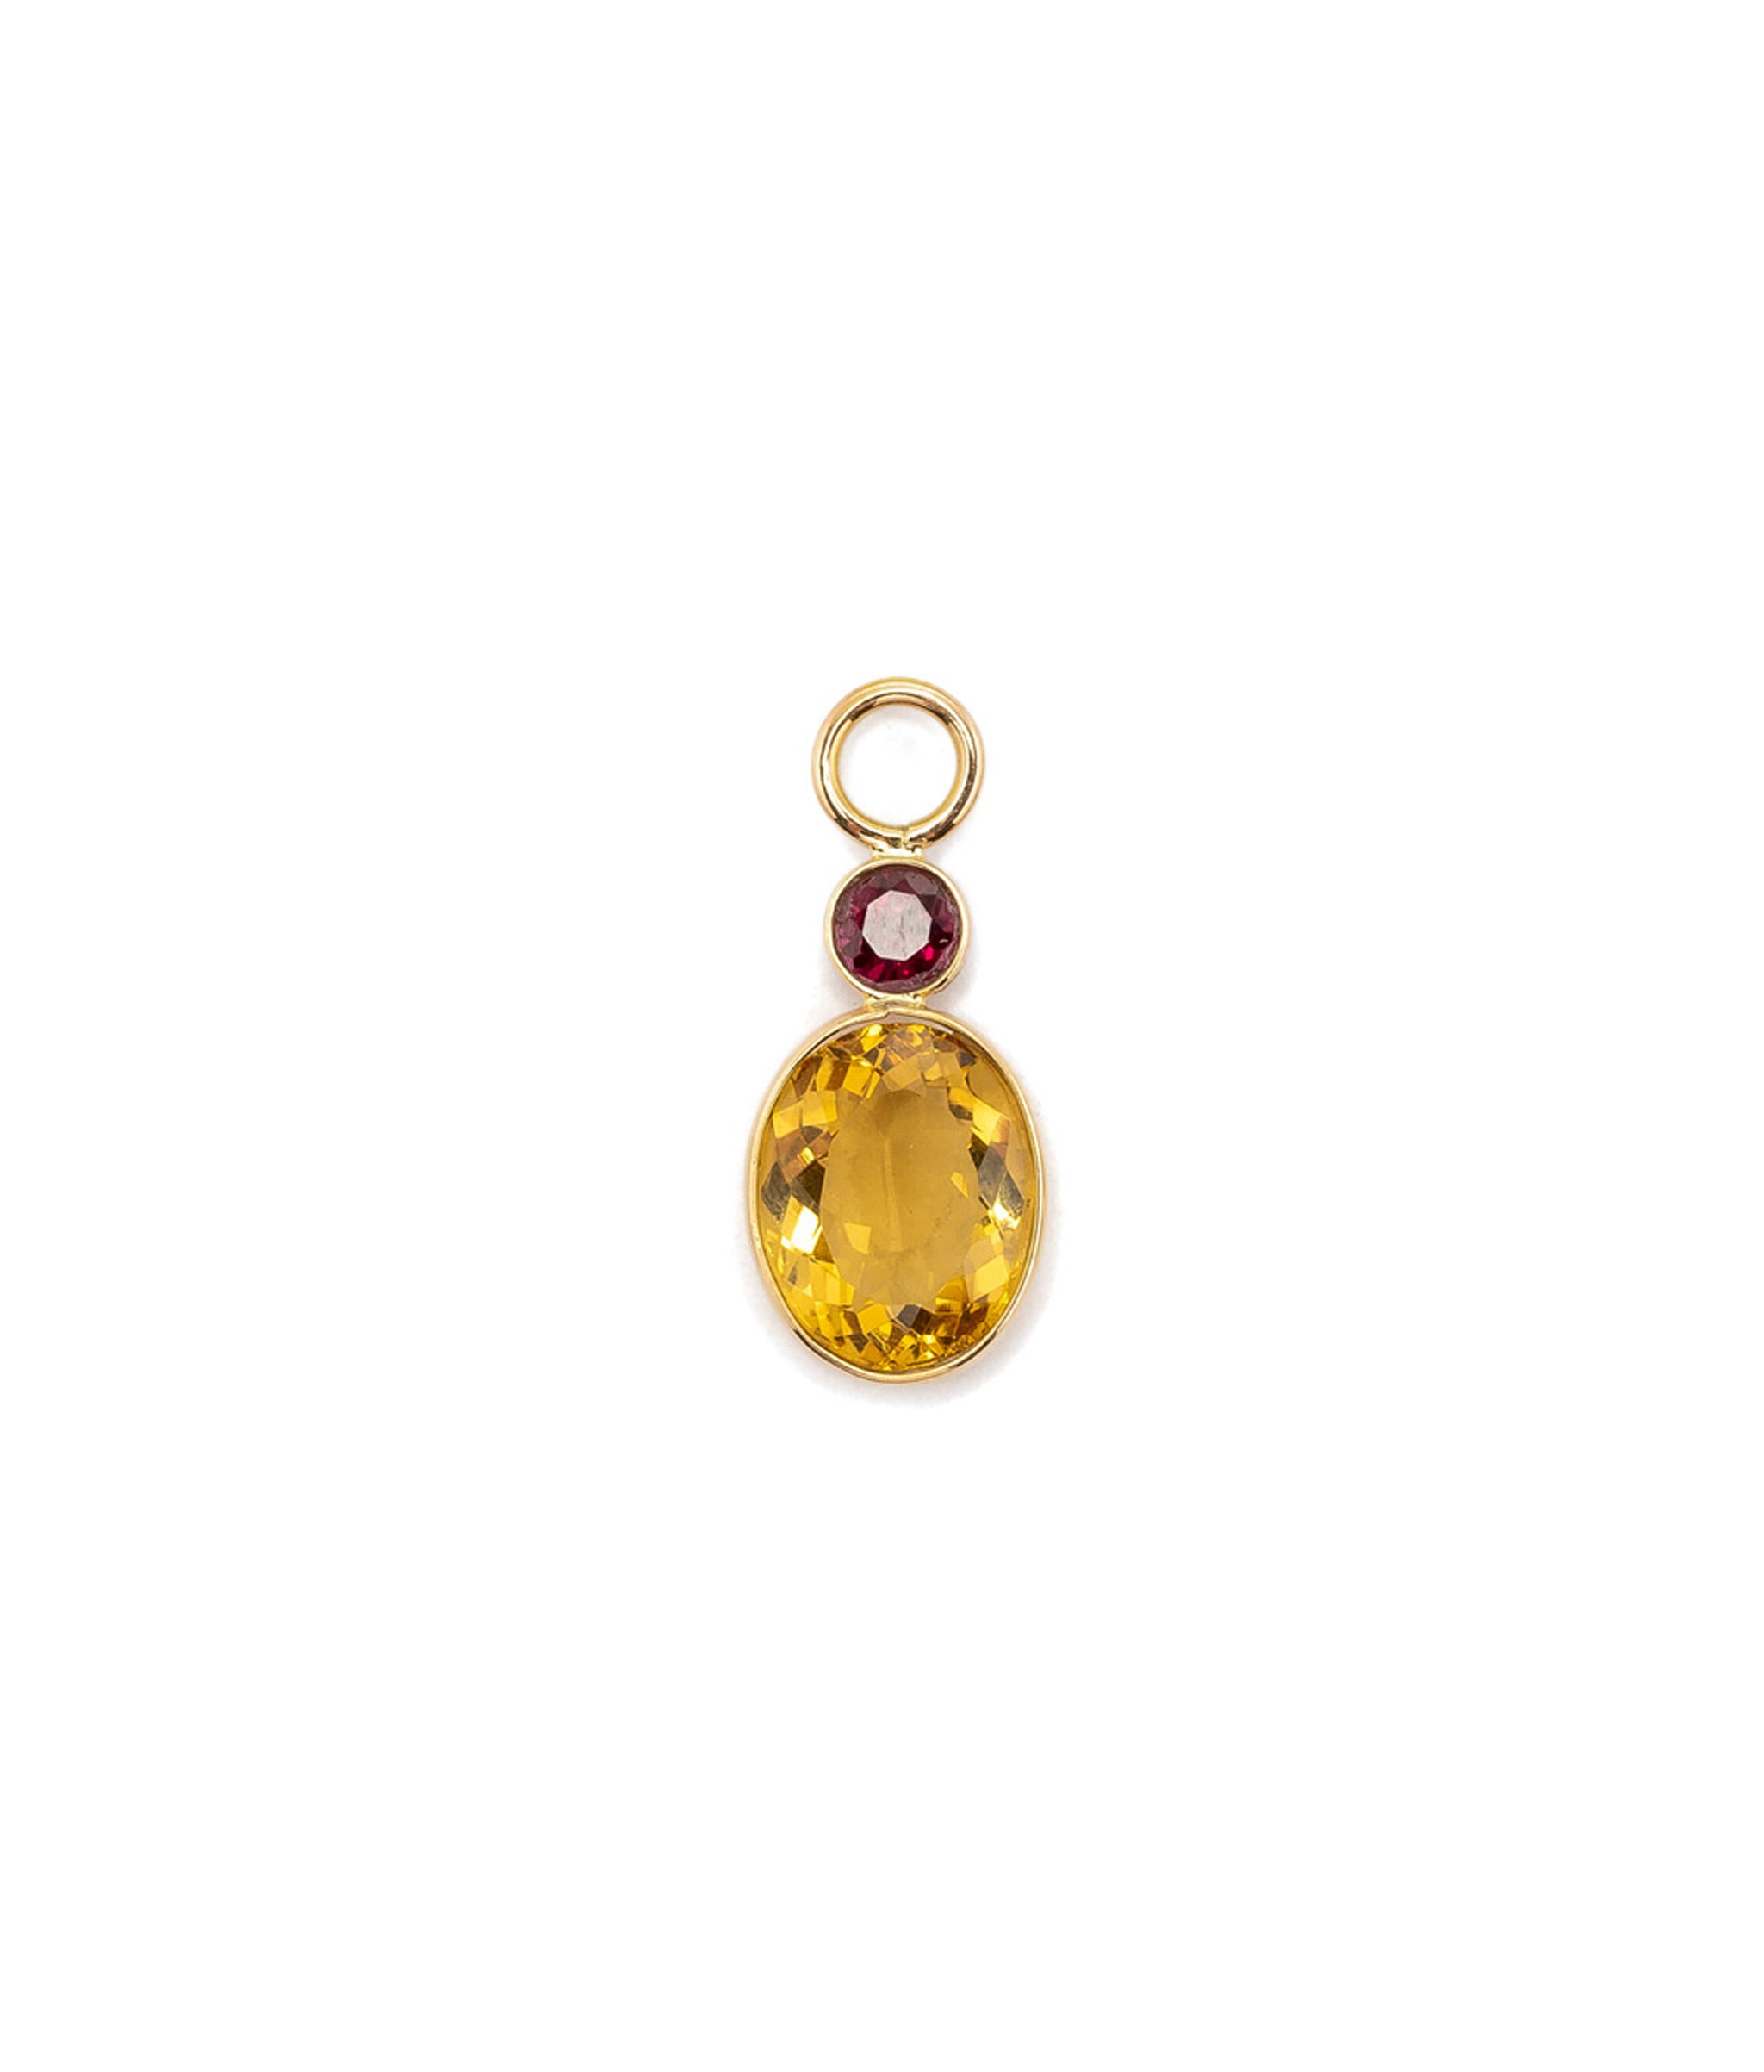 Garnet and Citrine Oval 14k Earring Charm. Faceted round garnet and yellow citrine oval with fine gold bezels and ring.